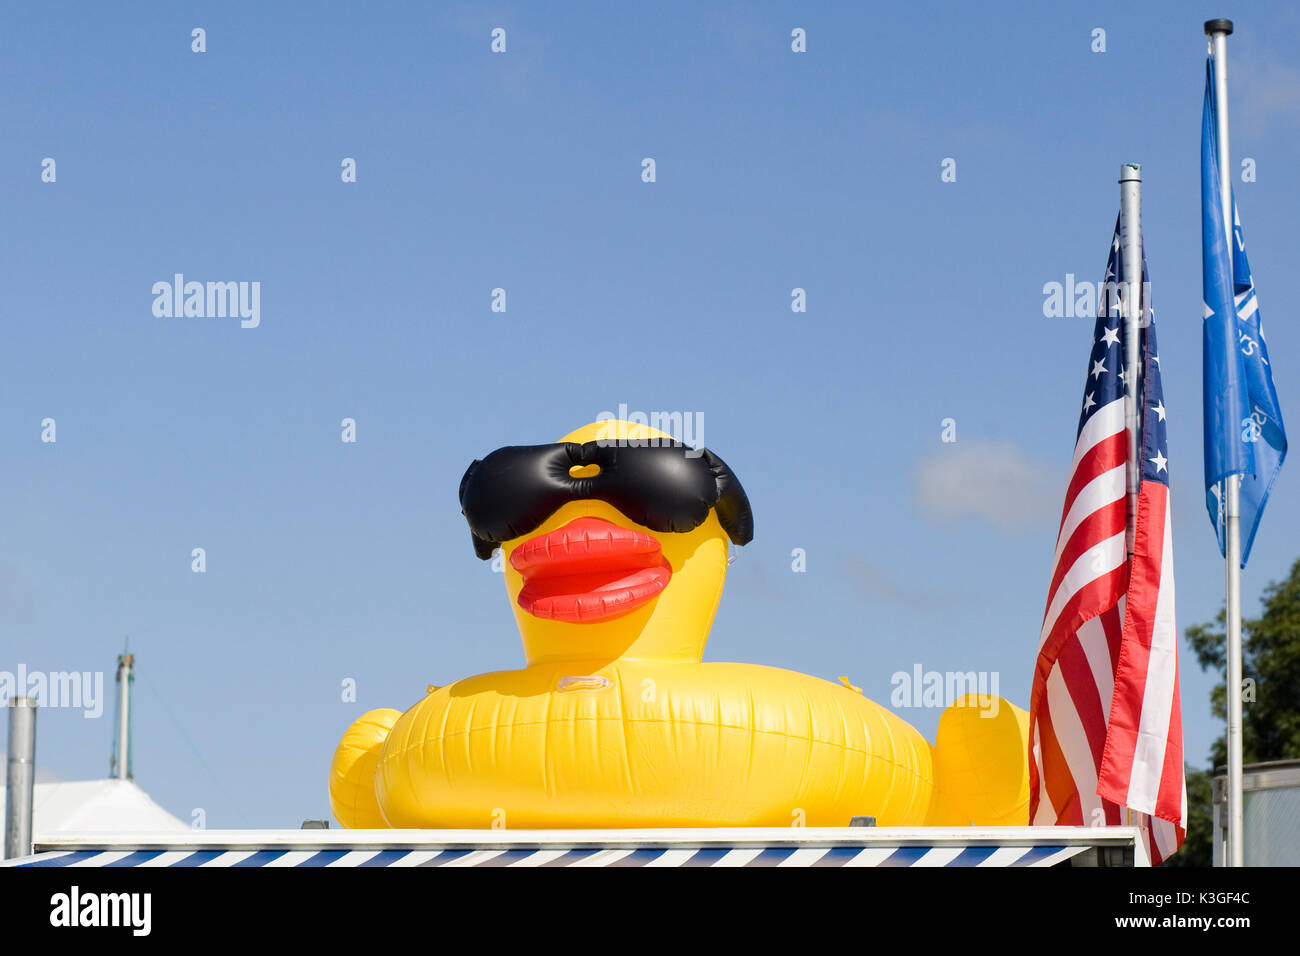 Inflatable duck on the roof of a building with the American flag Stock Photo